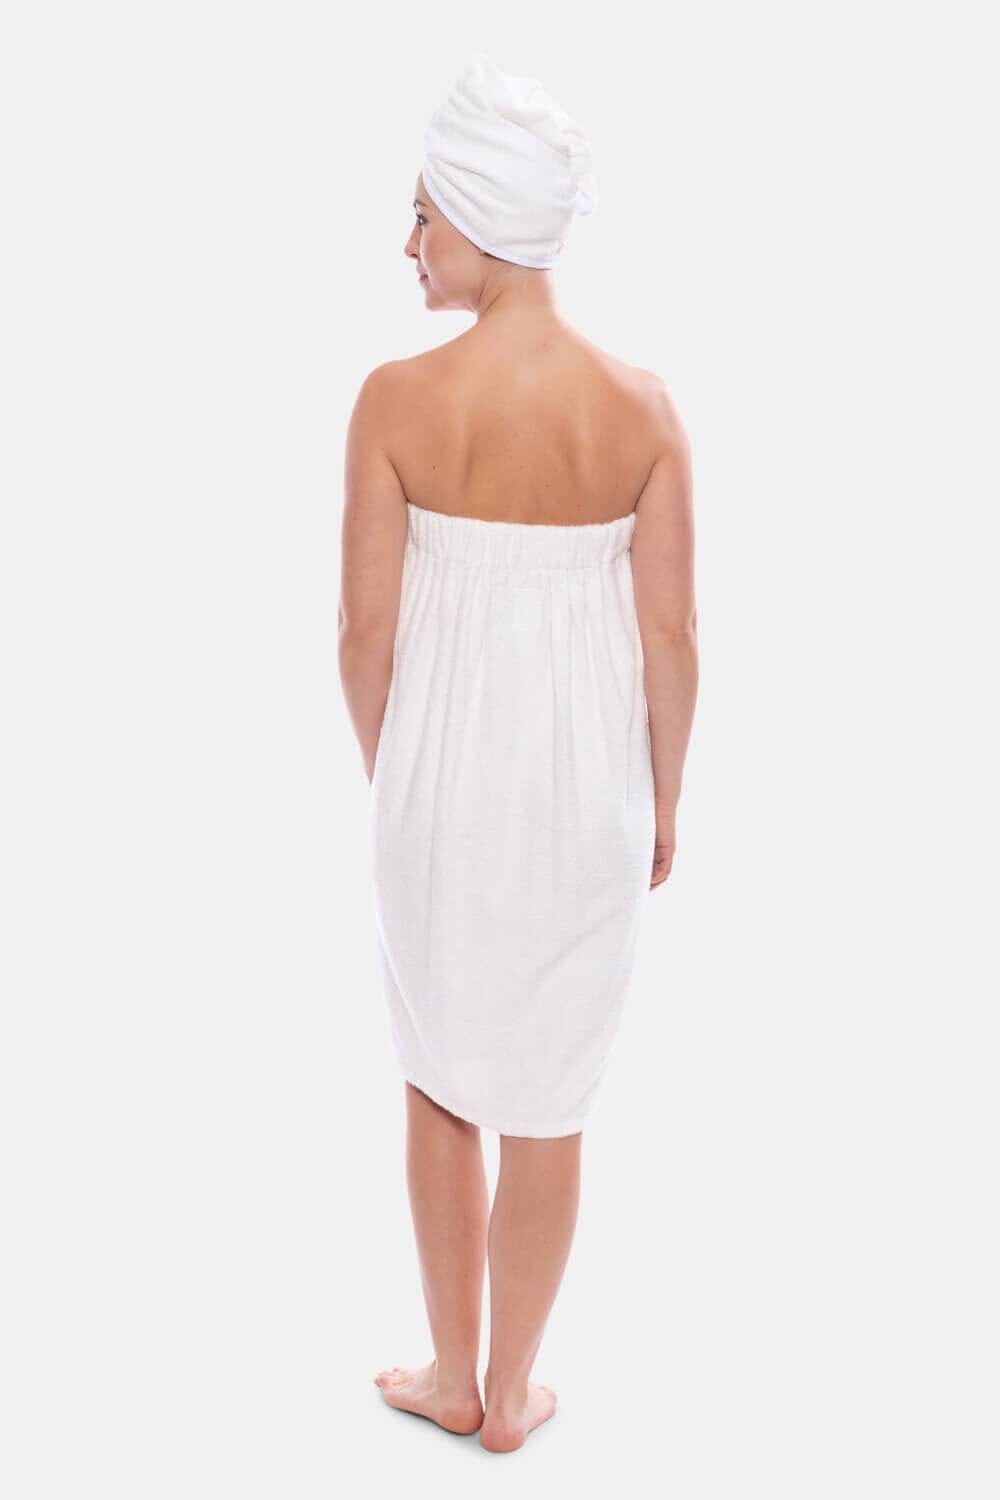 Texere Women's 2pc Terry Cloth Body and Hair Wrap Womens>Spa>Set Fishers Finery 